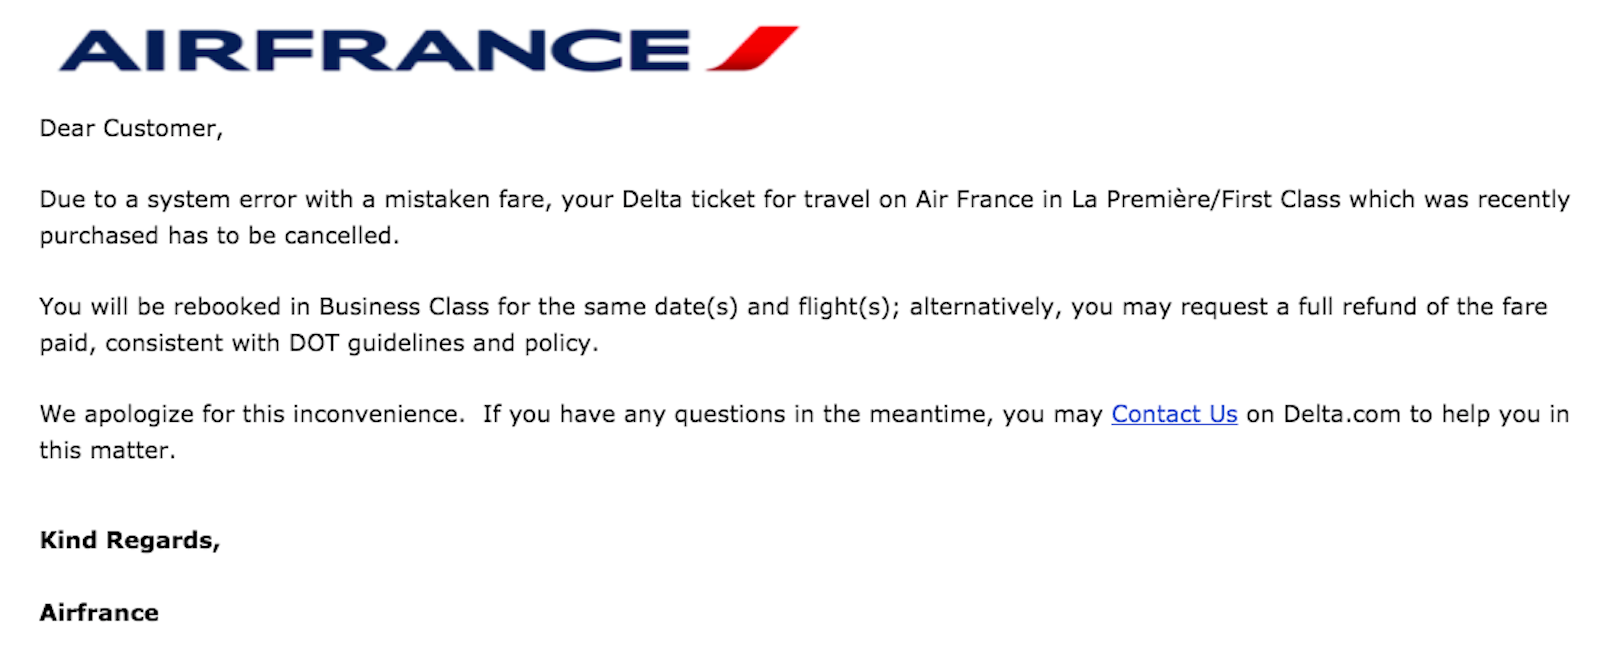 Air France allows for Delta cancellations if you don't want business class